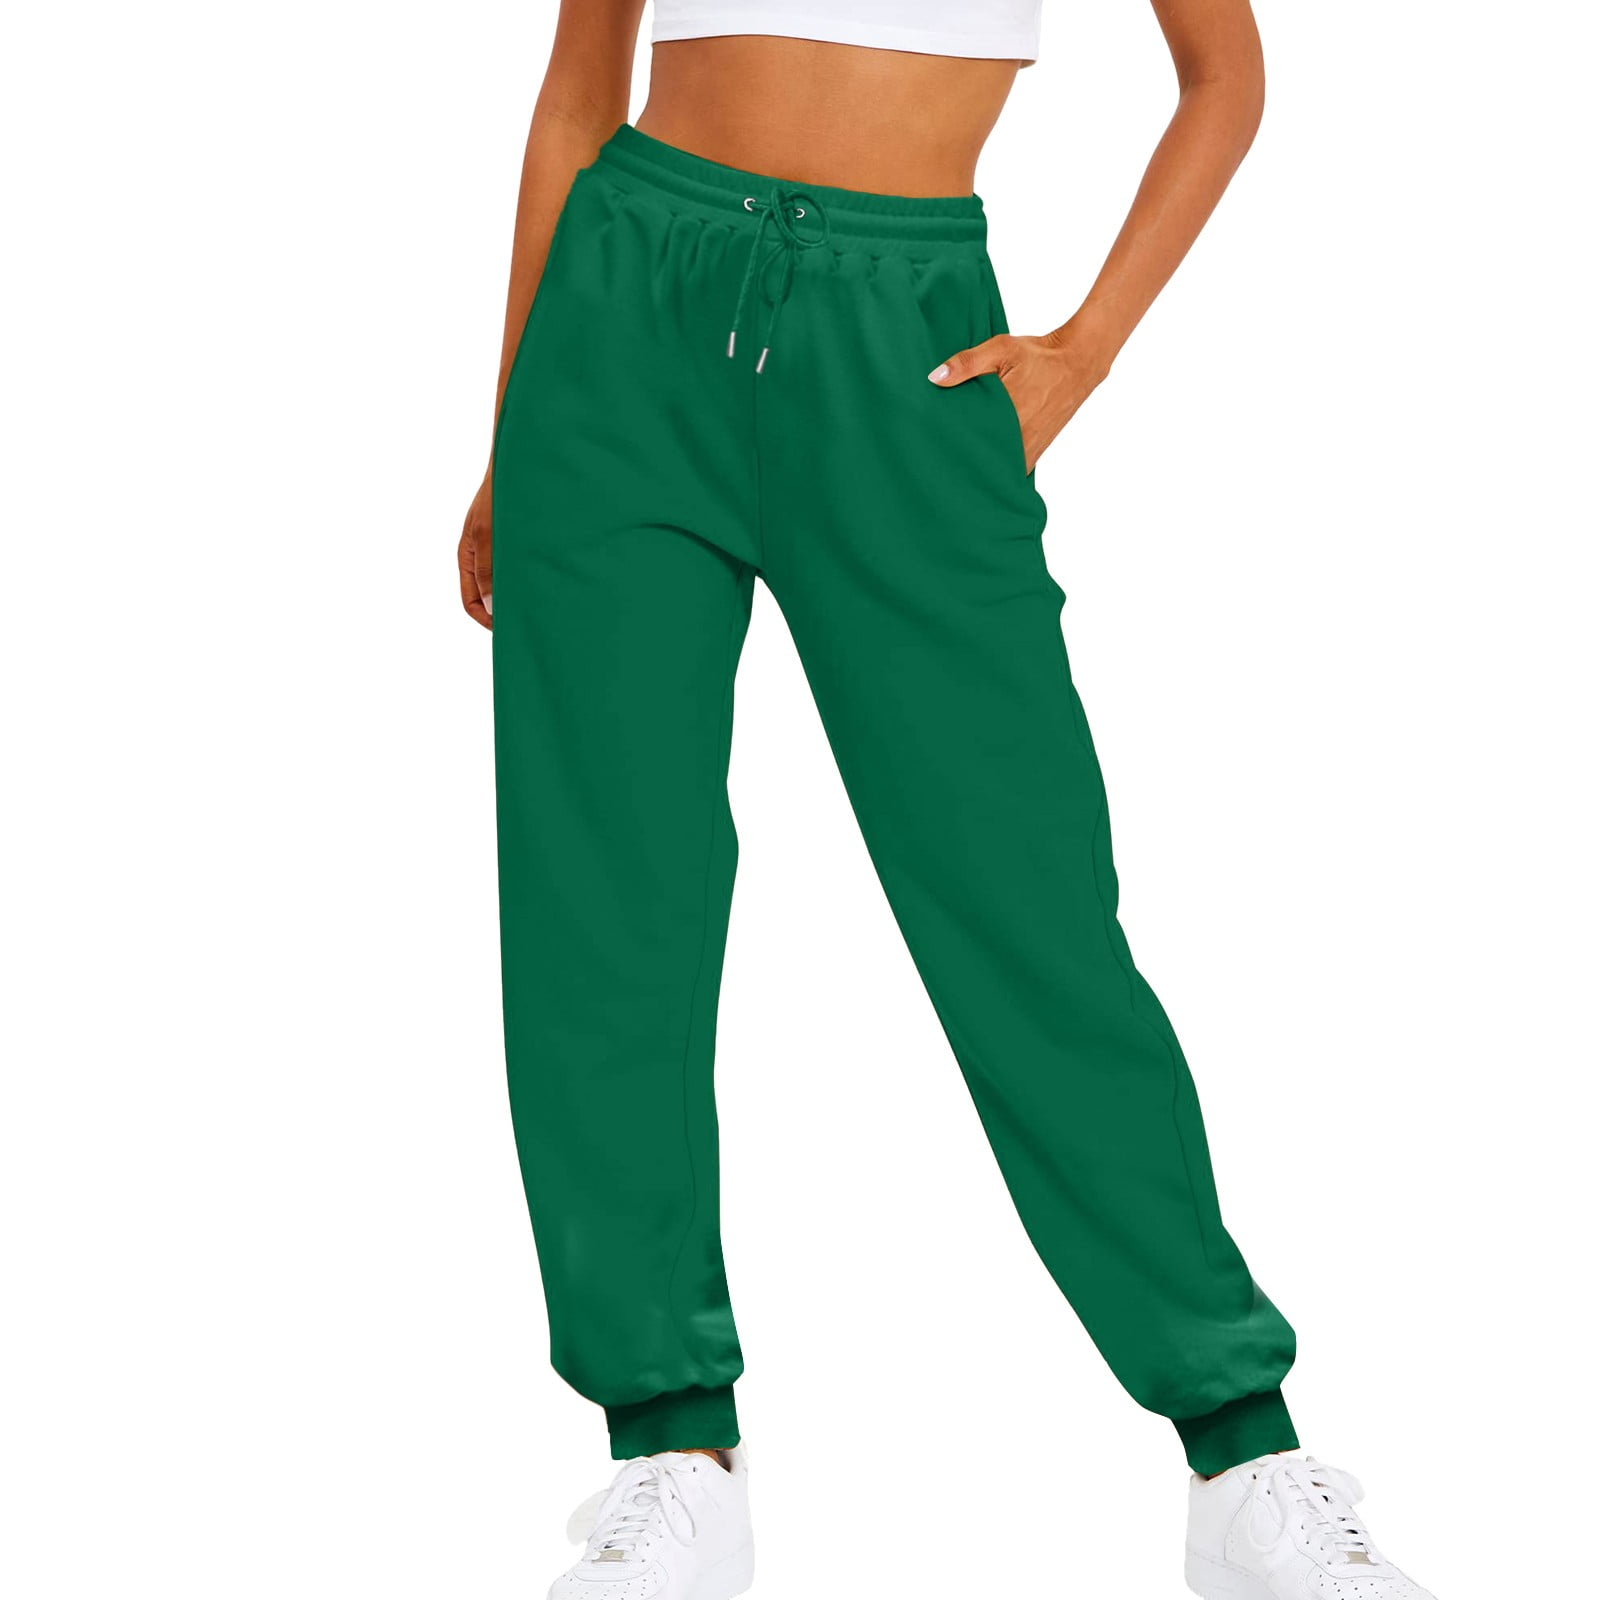 Women'S Cinch Bottom Sweatpants High Waisted Athletic Joggers Lounge P